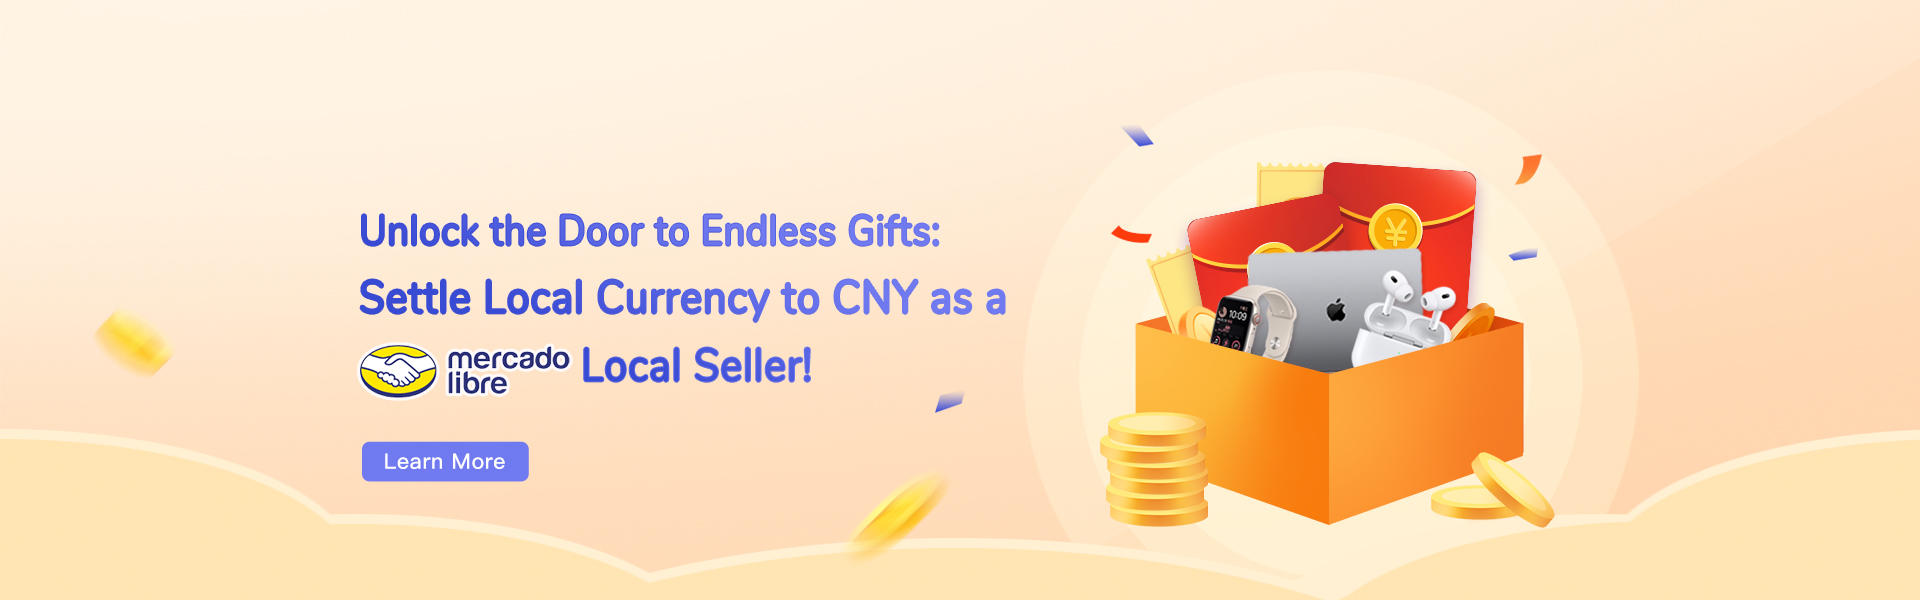 Win Gifts for CNY Settlement as a MercadoLibre Local Seller!